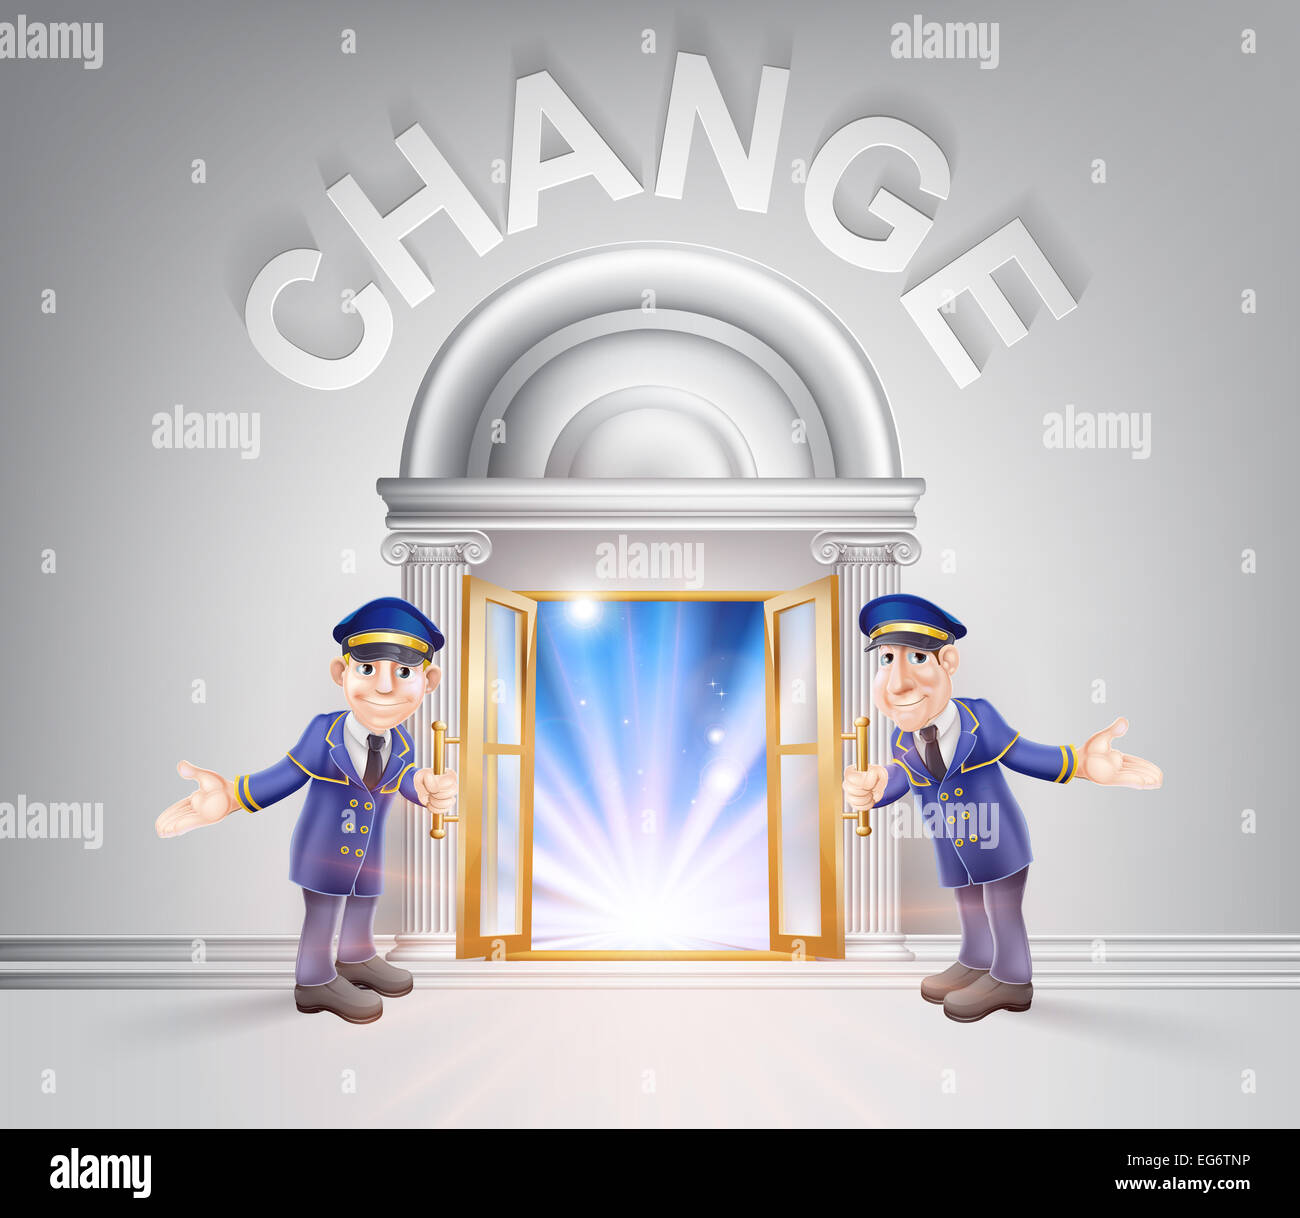 Change concept of a doormen hoding open a door to change with light streaming through it. Stock Photo